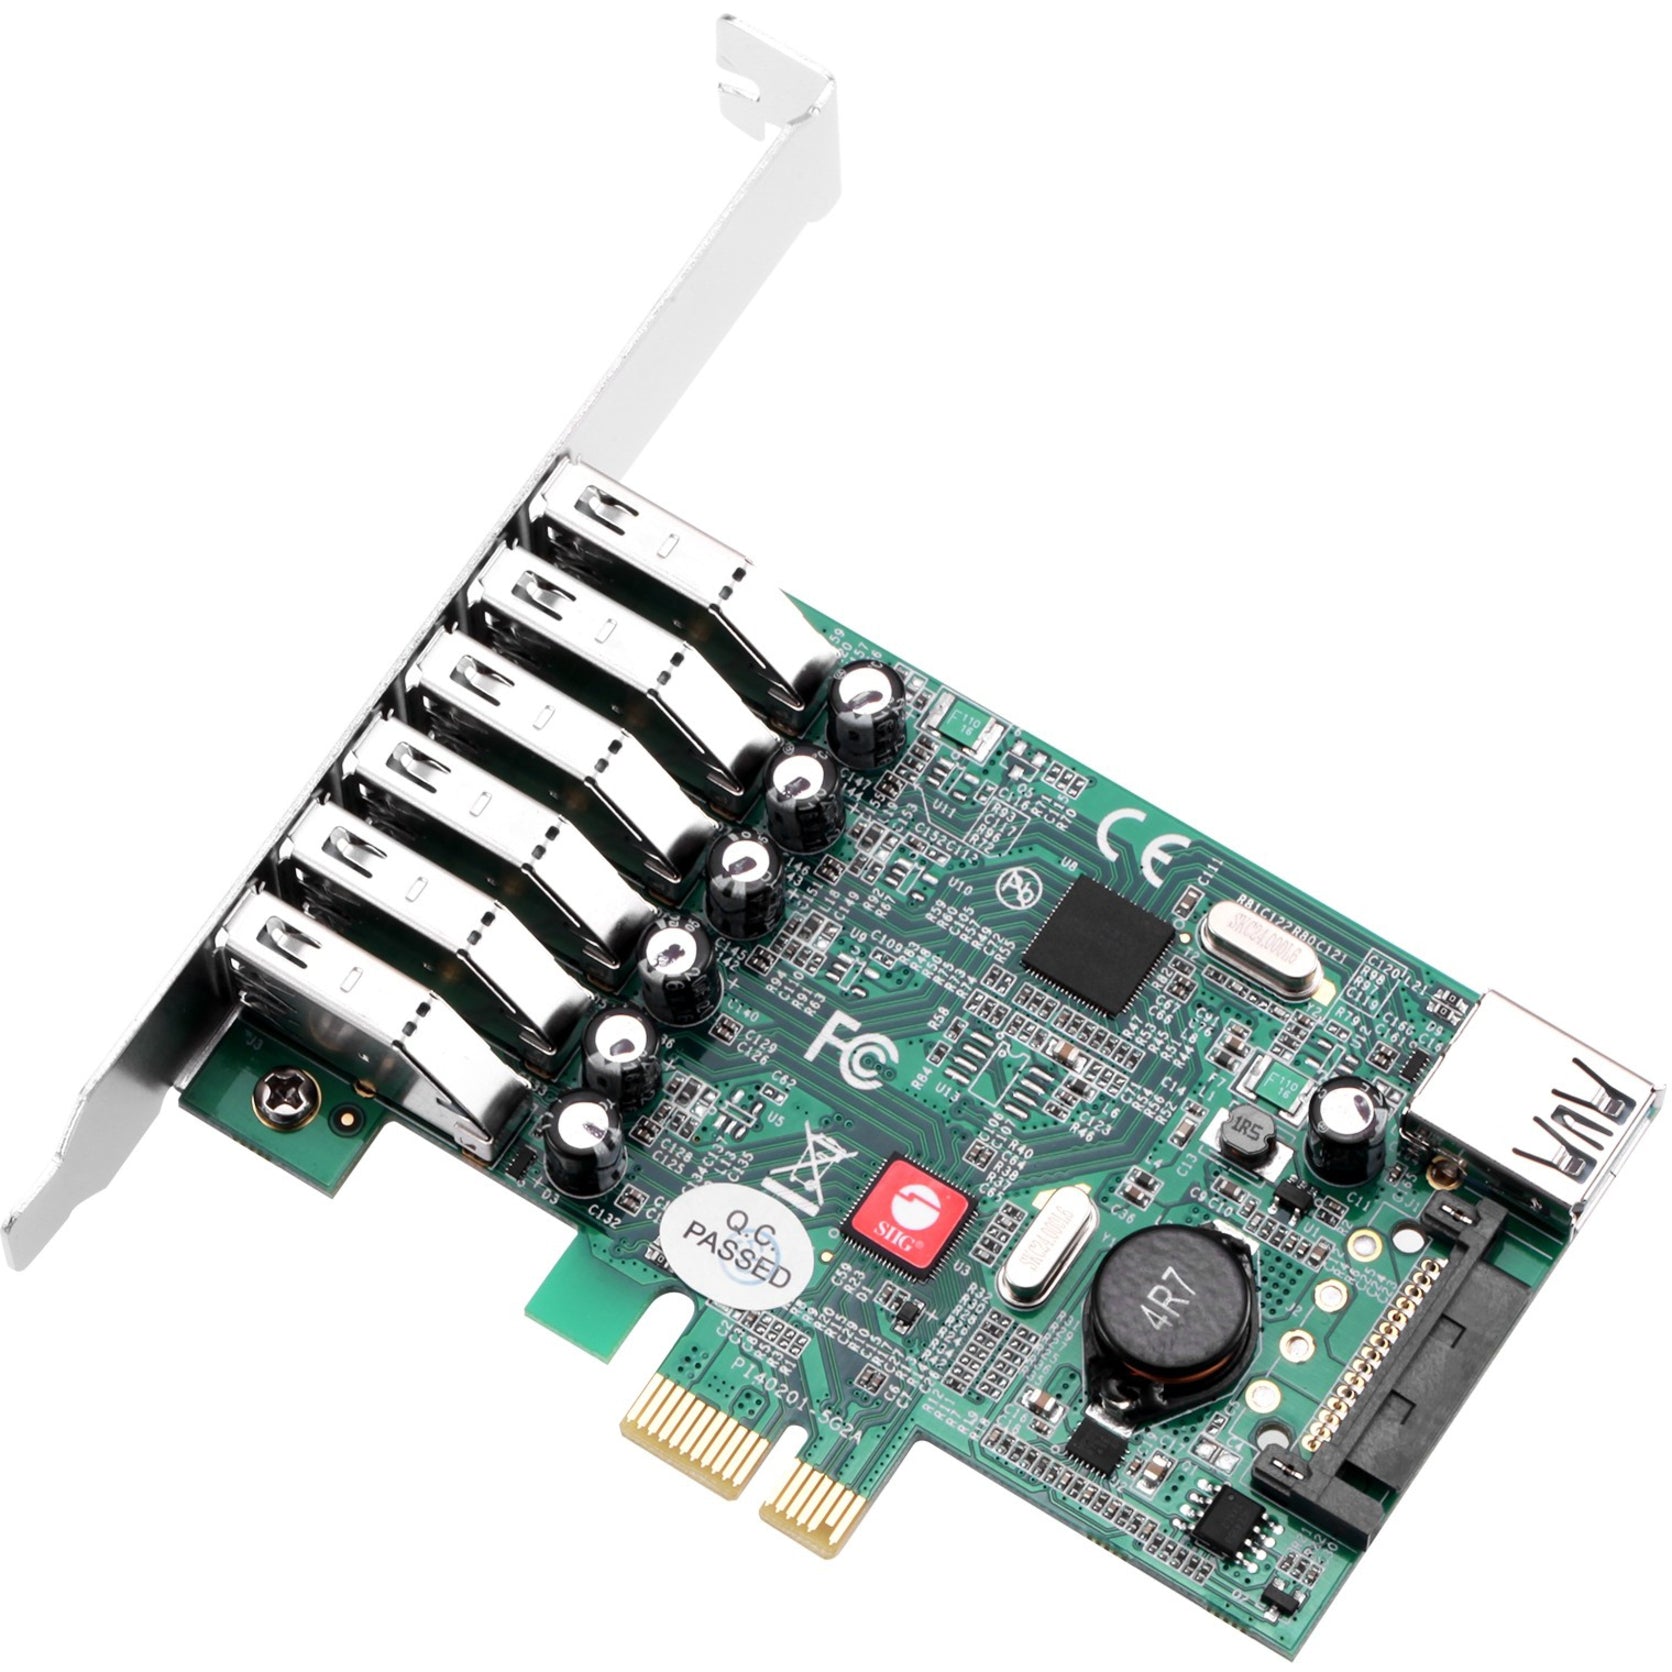 SIIG JU-P70011-S1 DP USB 3.0 7-Port PCIe i/e, High-Speed Data Transfer and Easy Expansion